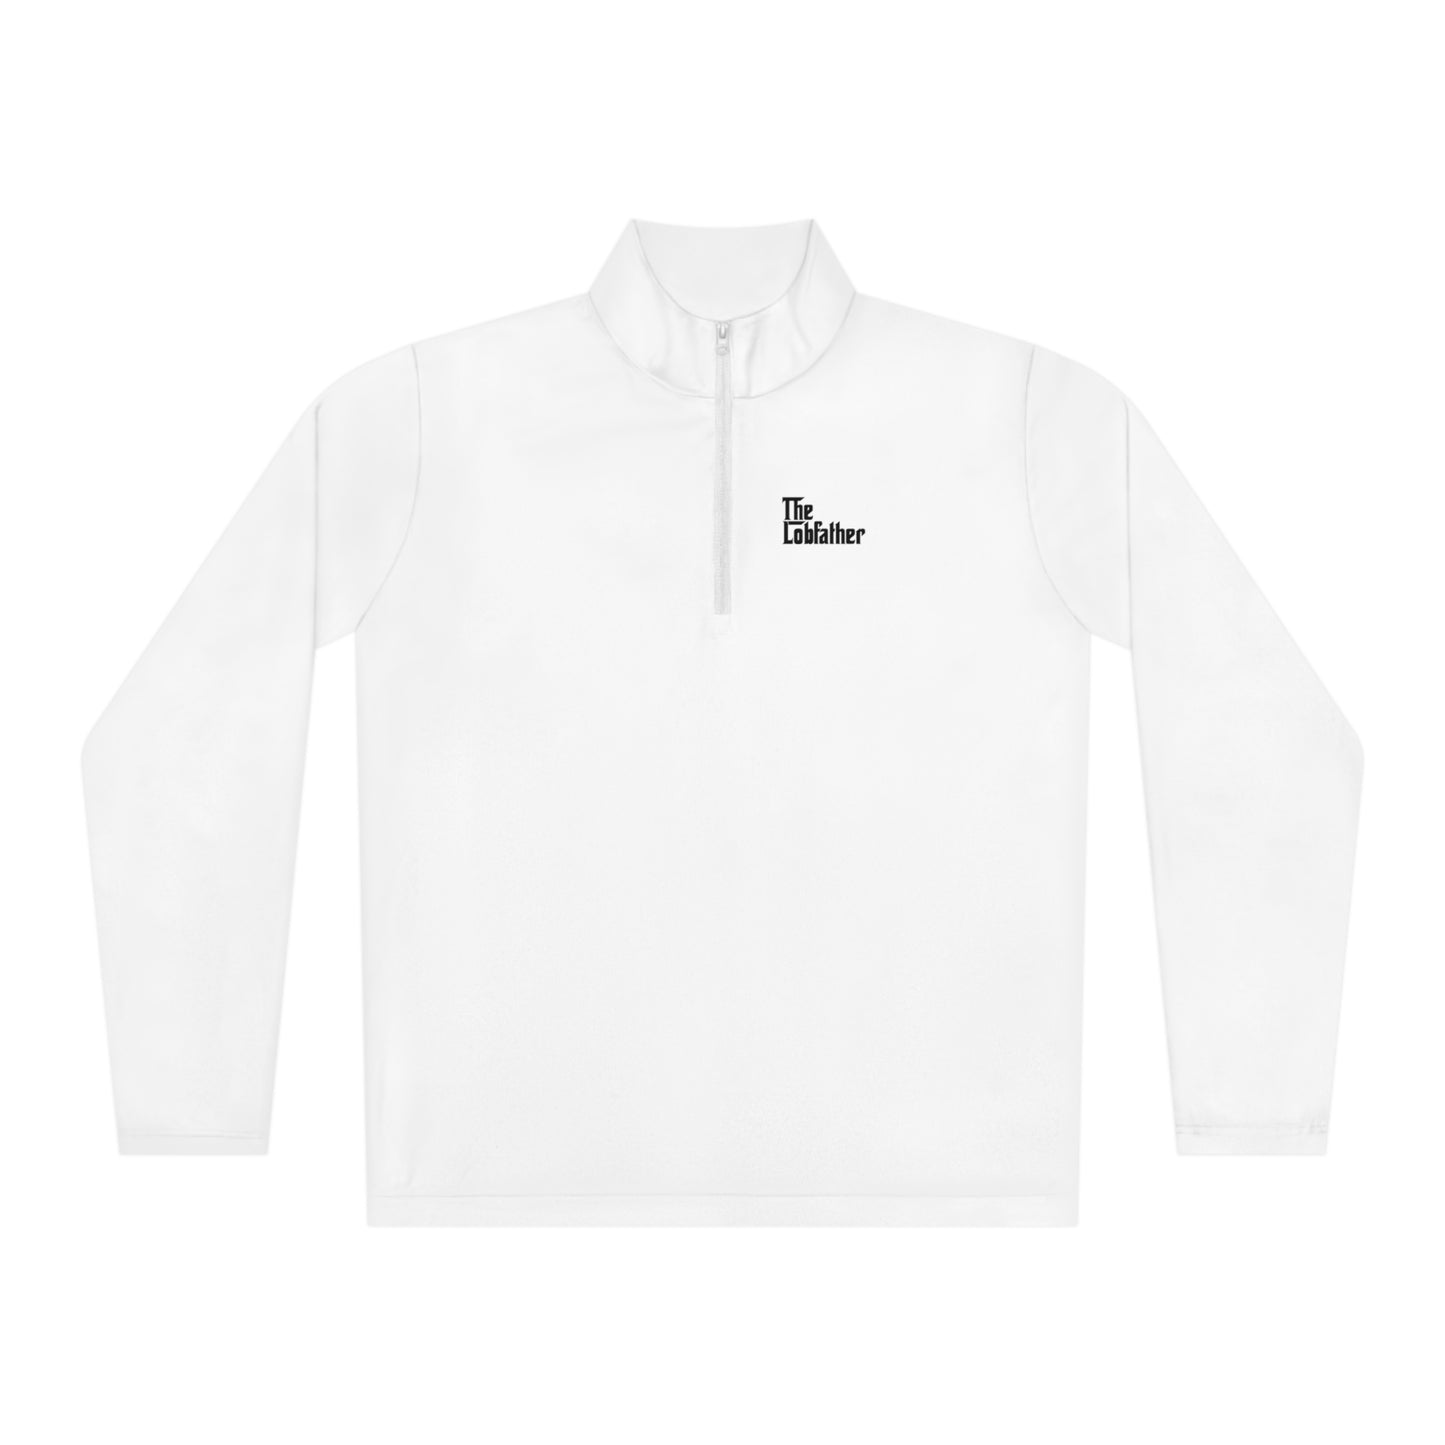 The Lobfather Unisex Quarter-Zip Performance Pullover